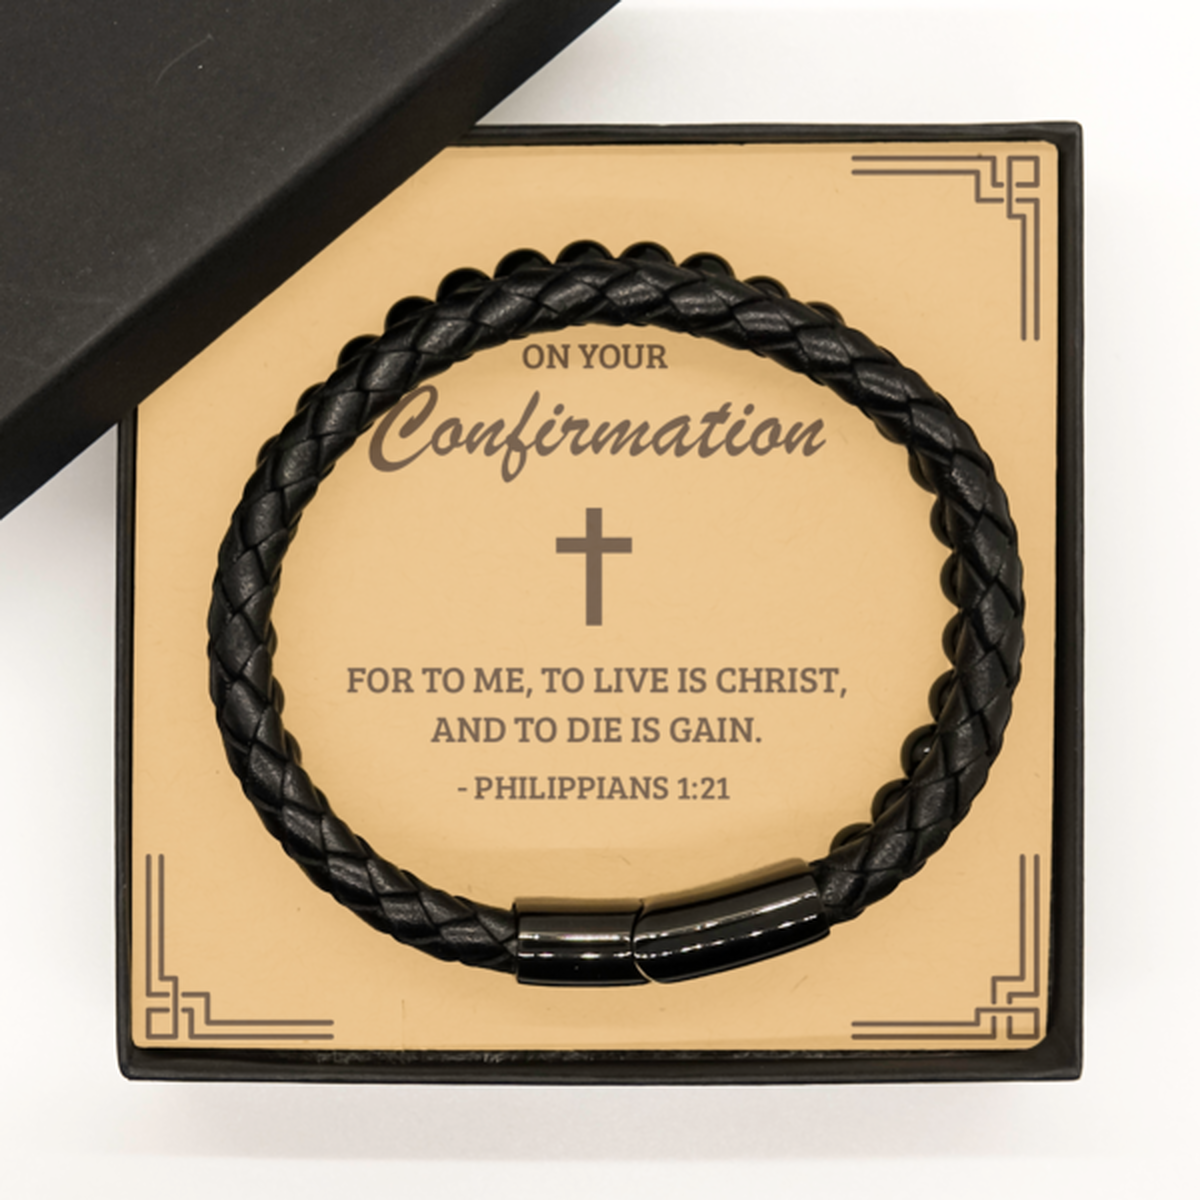 Confirmation Gifts for Teenage Boys, To live is Christ, and to die is gain, Stone Leather Bracelet with Bible Verse Message Card, Religious Catholic Bracelet for Son, Grandson, Dad, Godfather